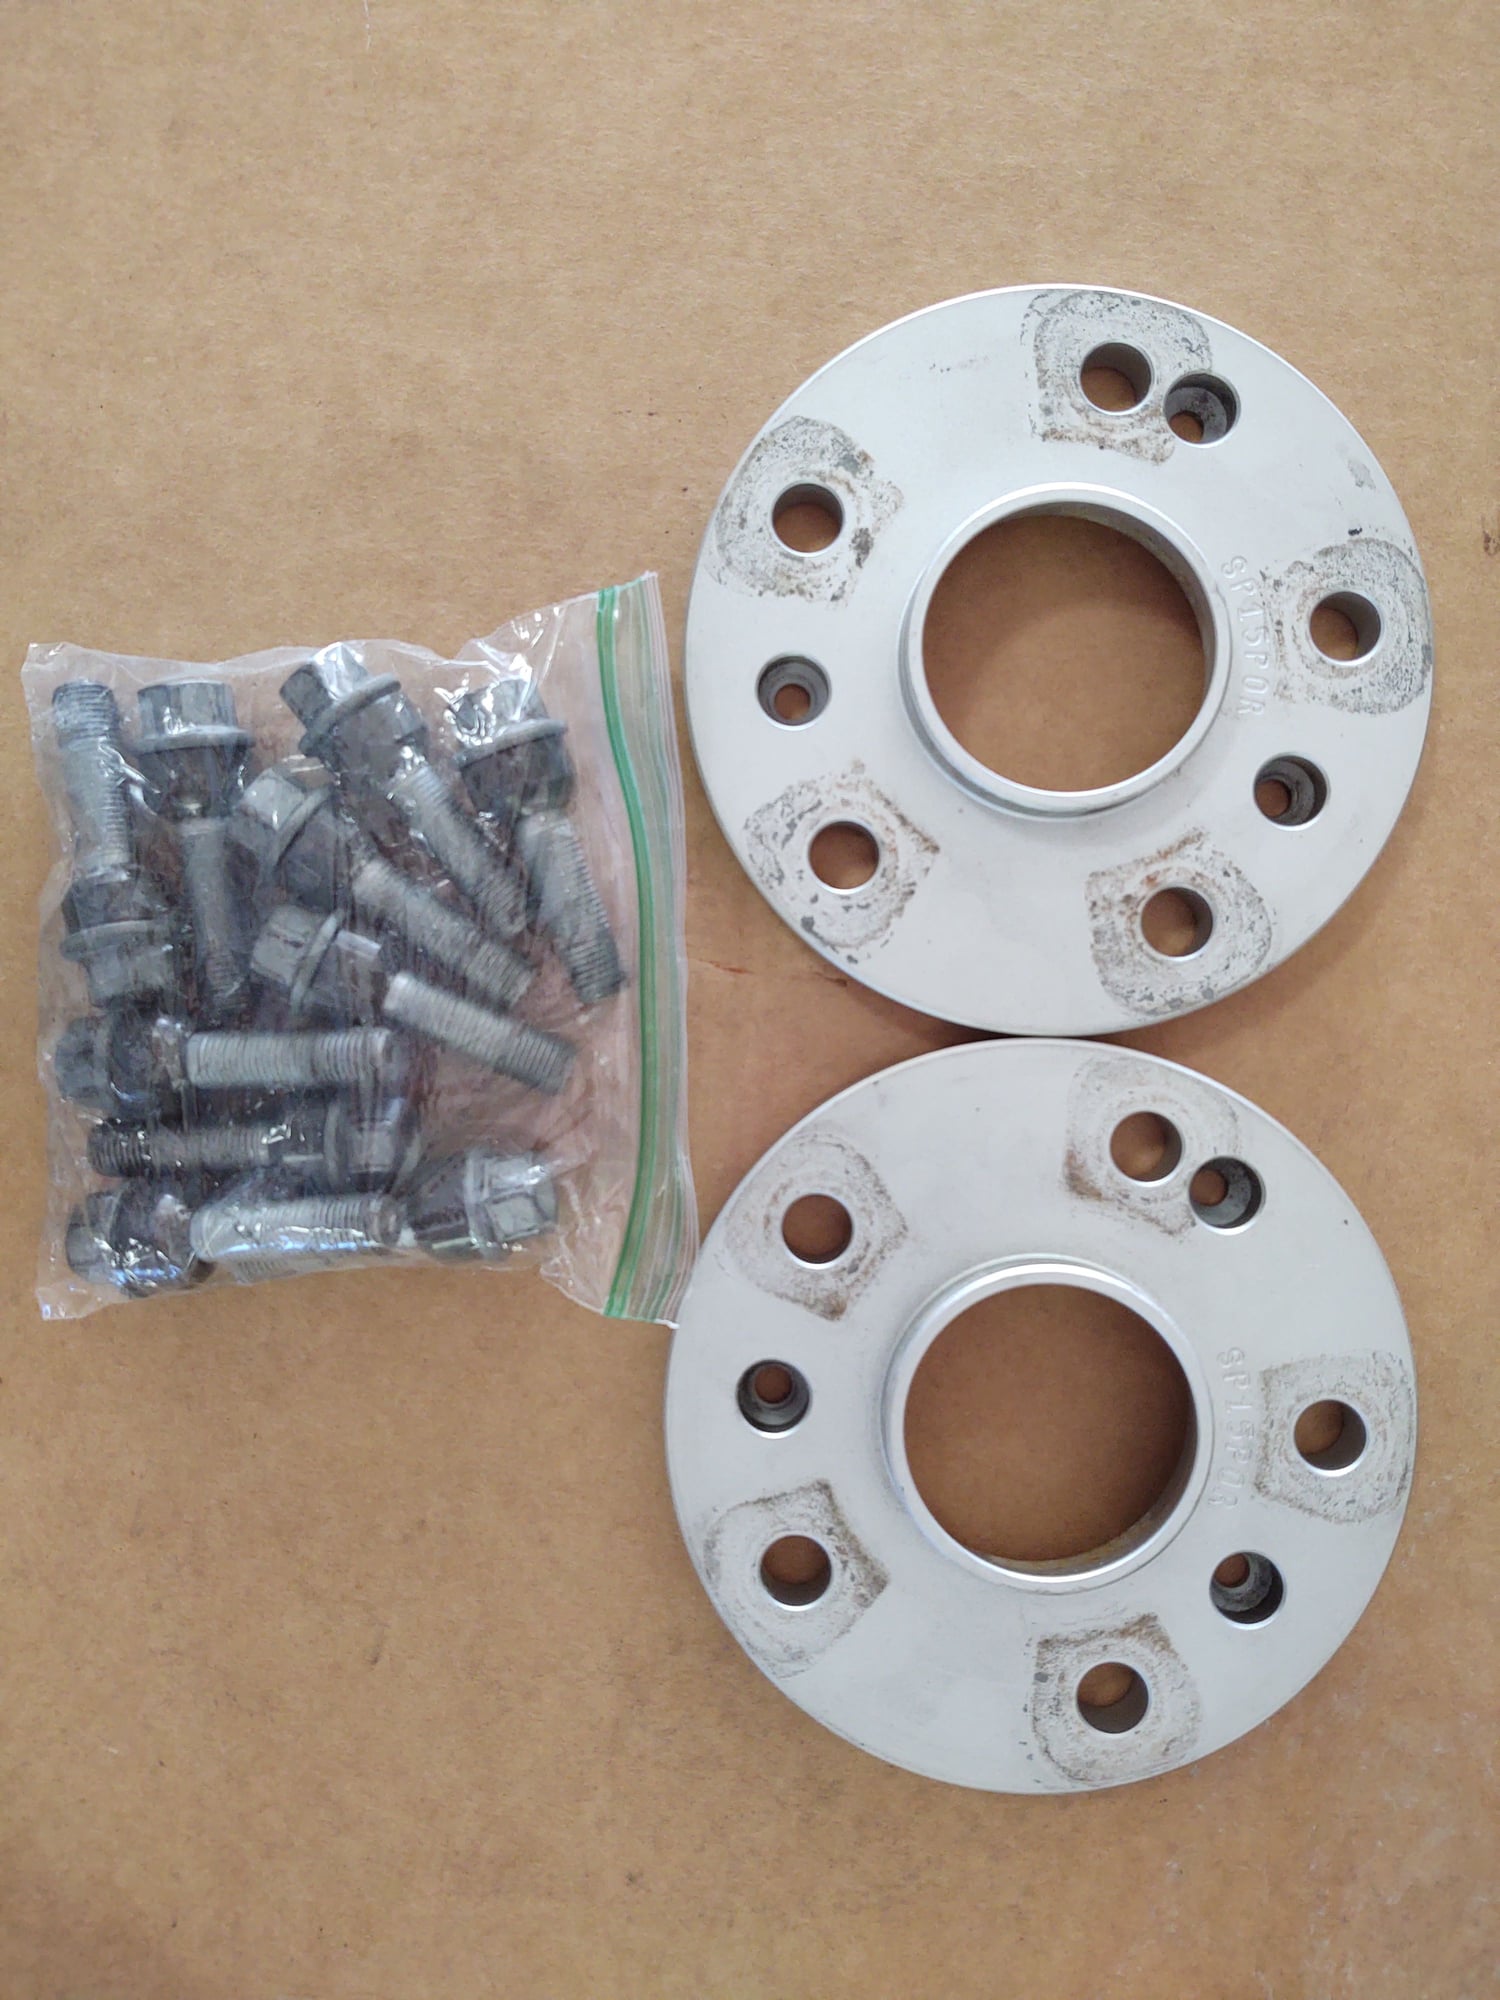 Steering/Suspension - 15mm wheel spacers - Used - 1999 to 2013 Porsche 911 - Weems, VA 22576, United States